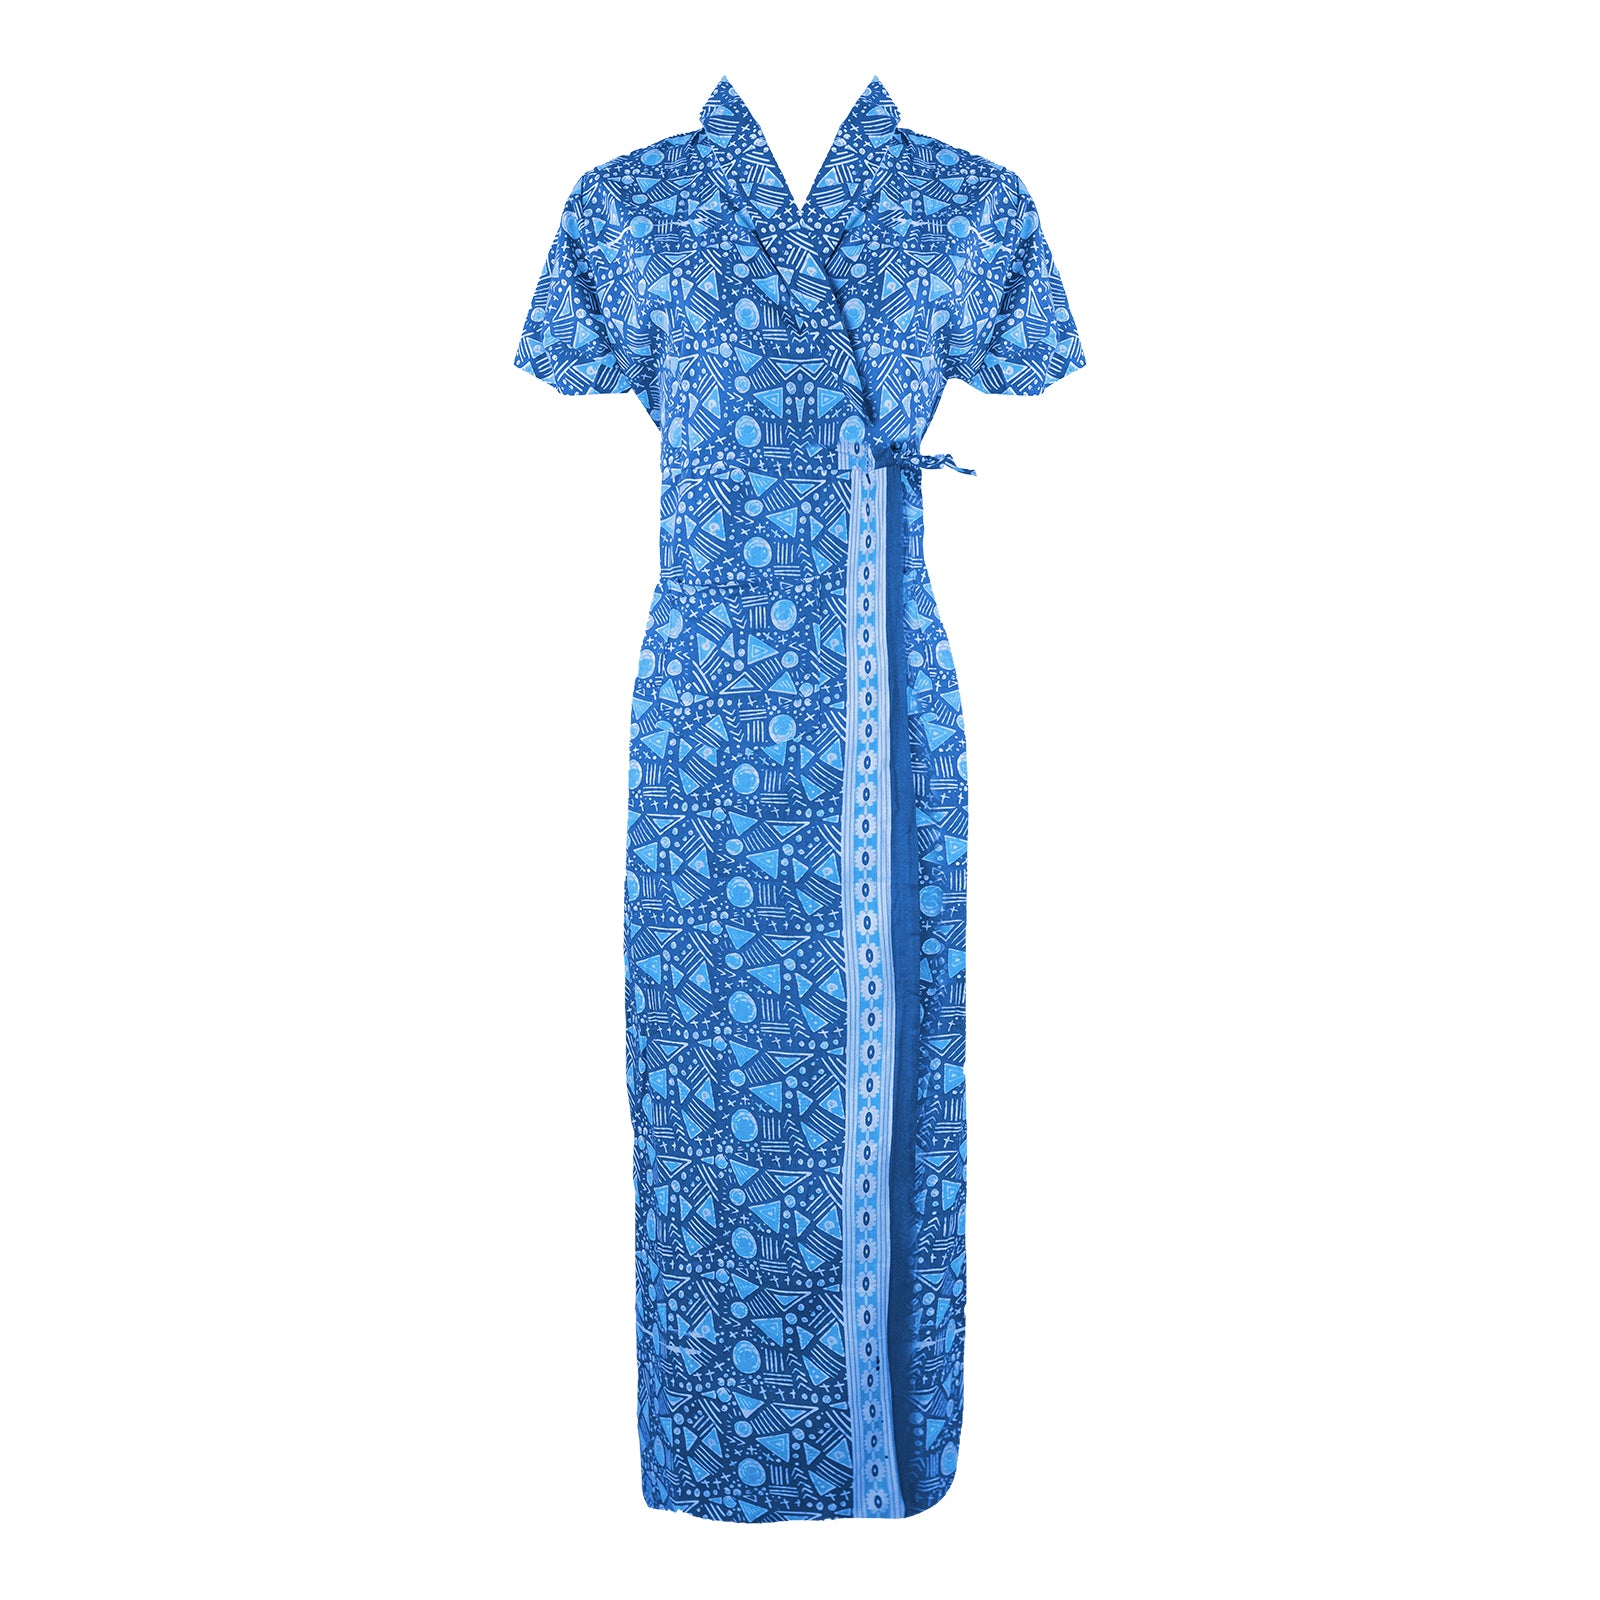 Blue Triangle Print / One Size NEW WOMEN 100% COTTON SUMMER DRESSING GOWN ROBE LADIES BATH ROBE The Orange Tags